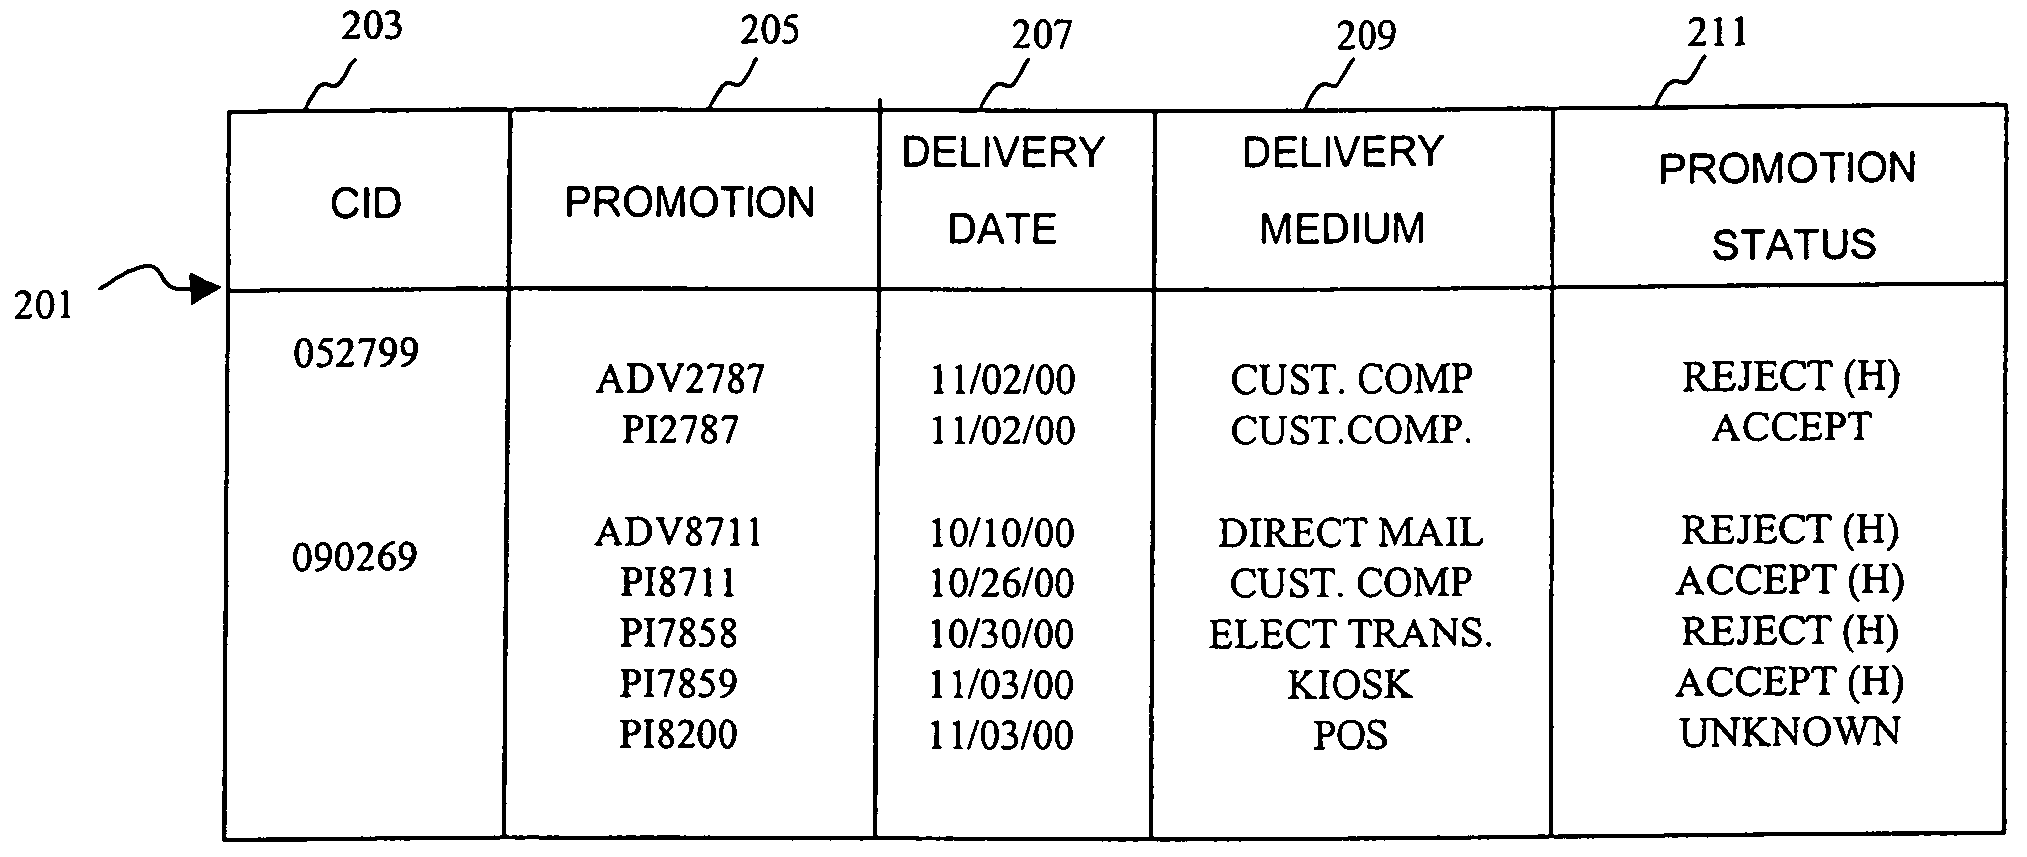 Method and system for providing promotions to a customer based on the status of previous promotions